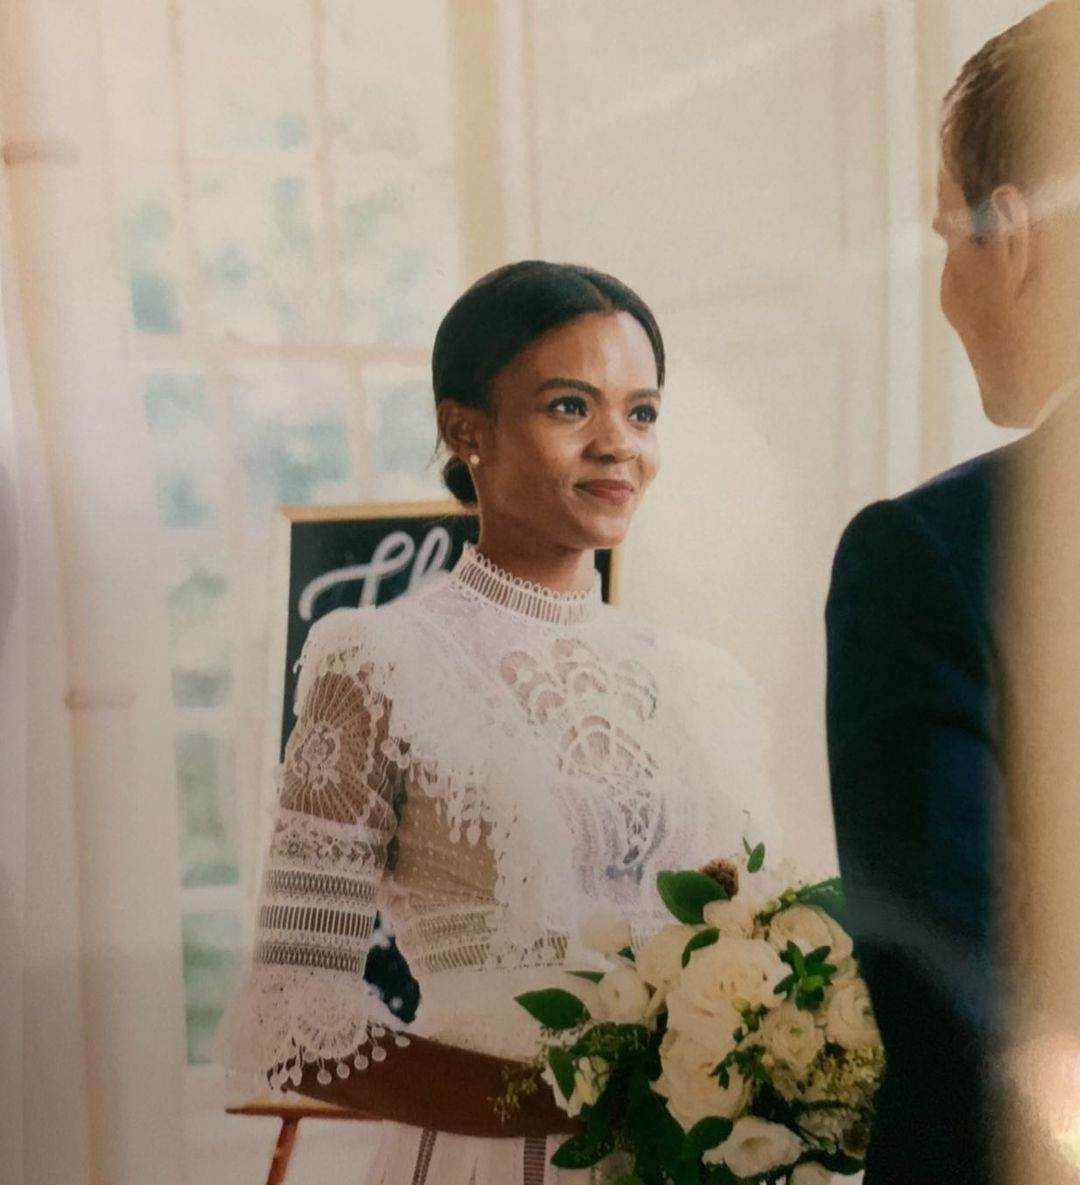 Candace Owens' Family, Marriage, Spouse, and Children Explored